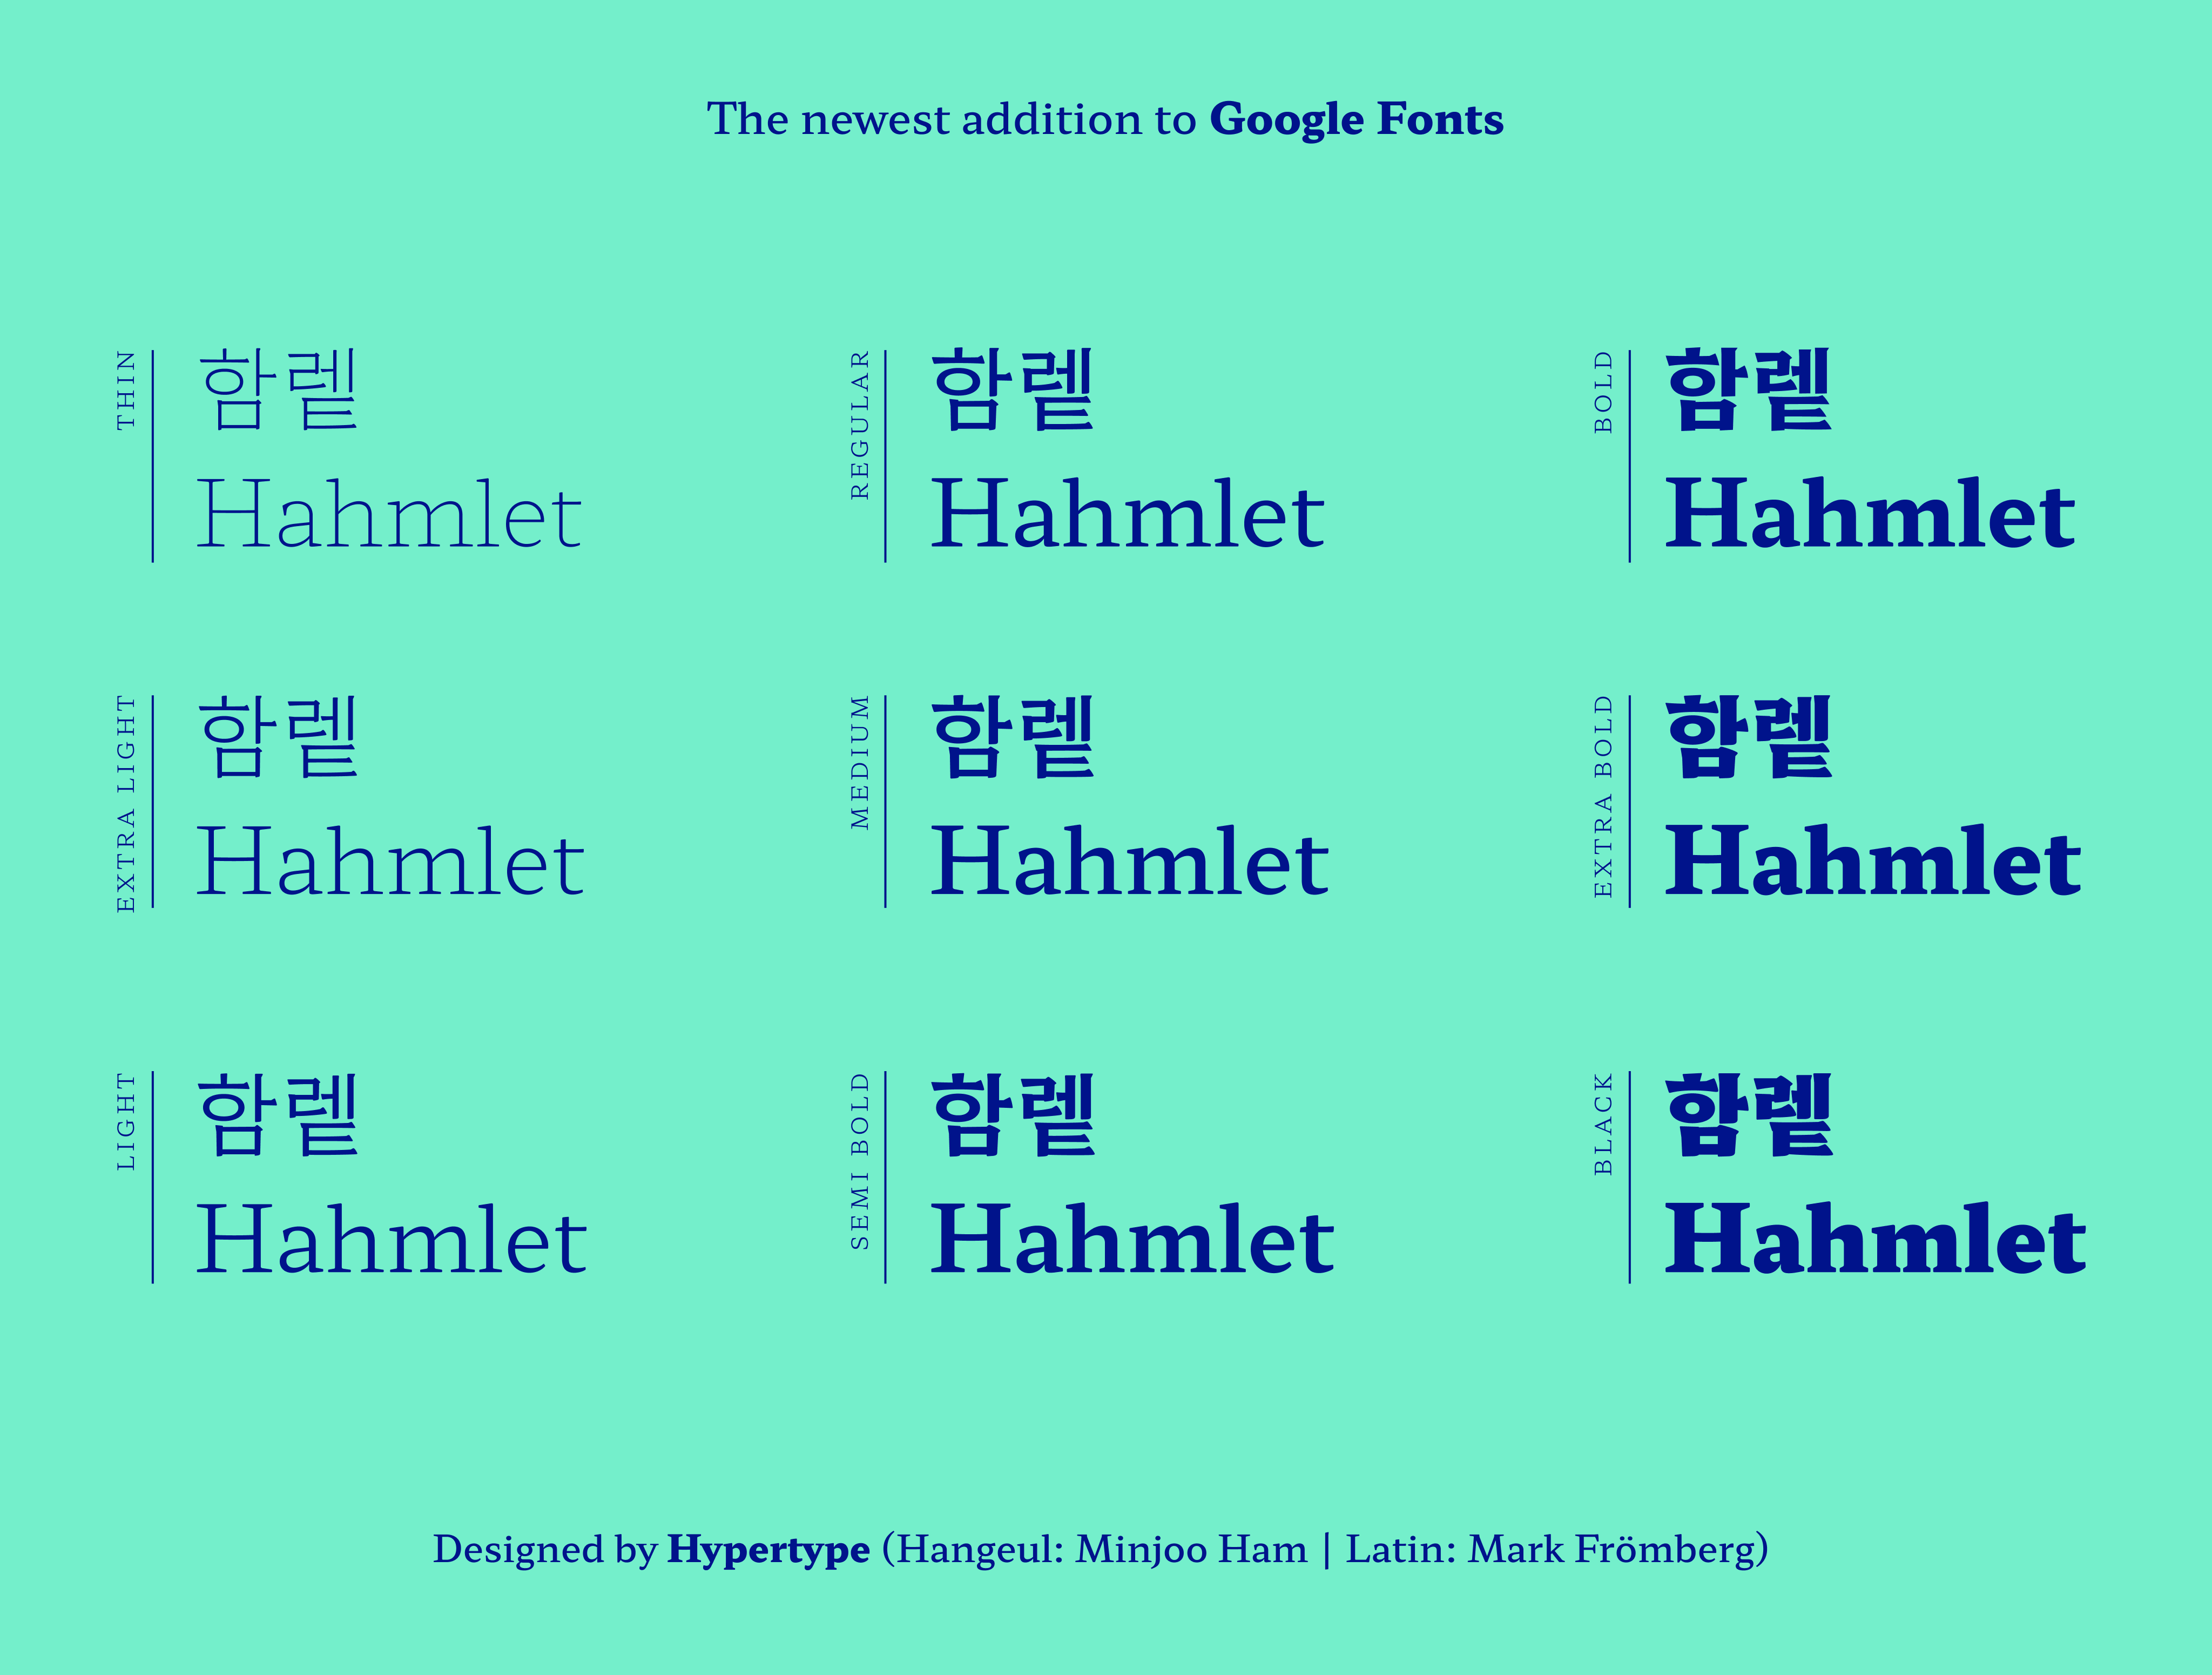 Hahmlet Fonts for Latin and Hangeul